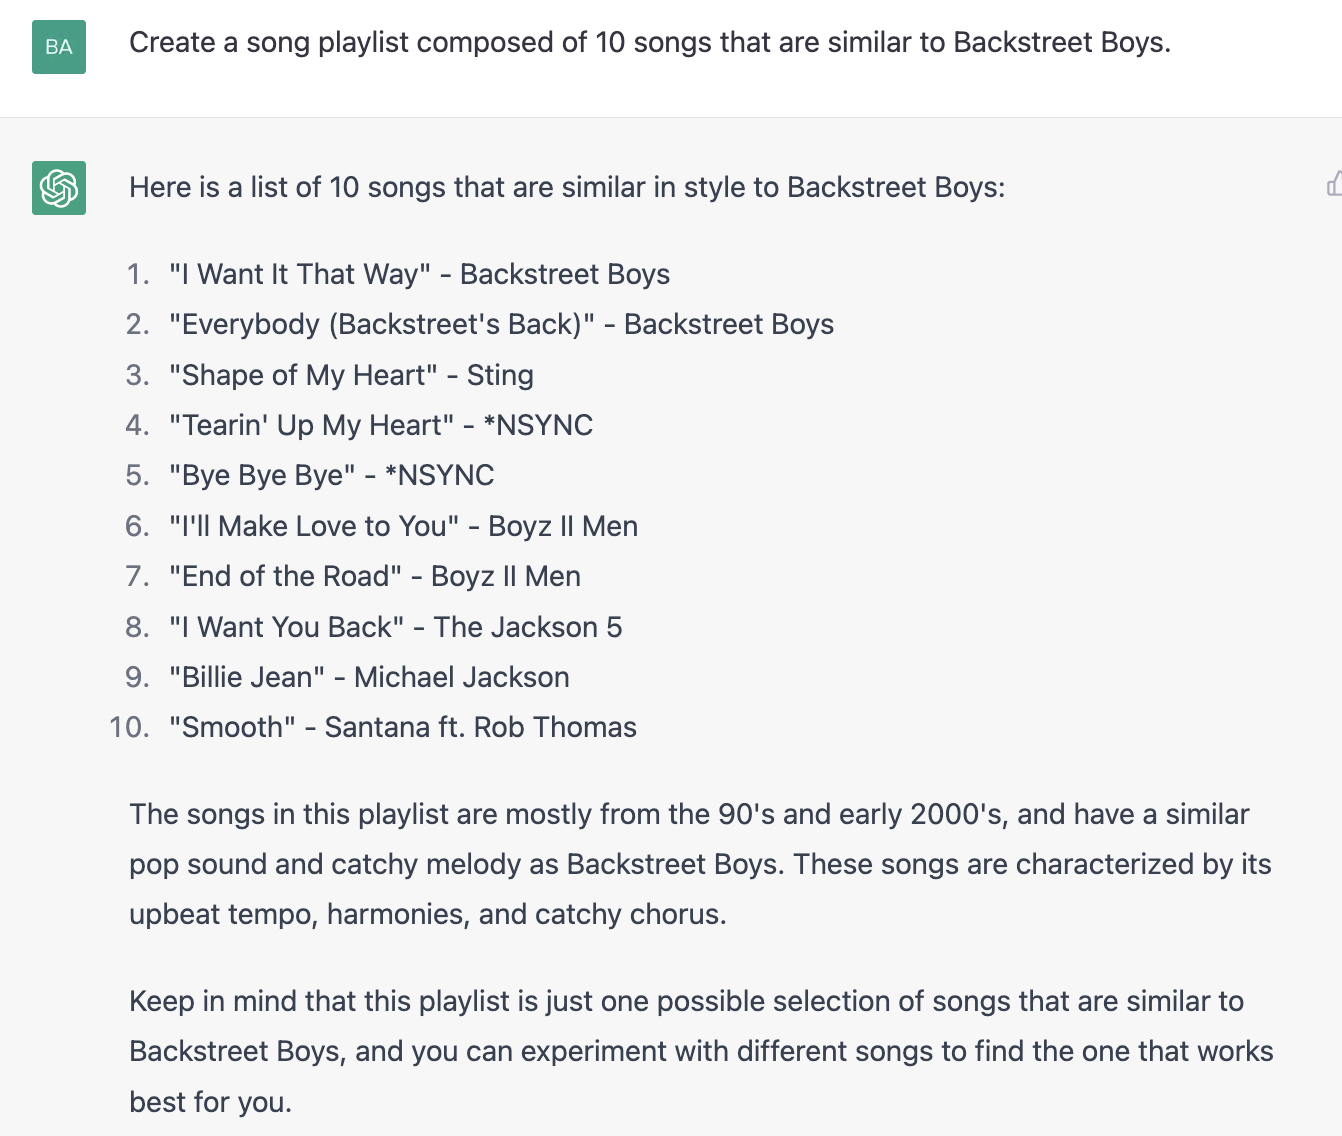 ChatGPT prompt about creating a song playlist composed of 10 songs that are similar to backstreet boys